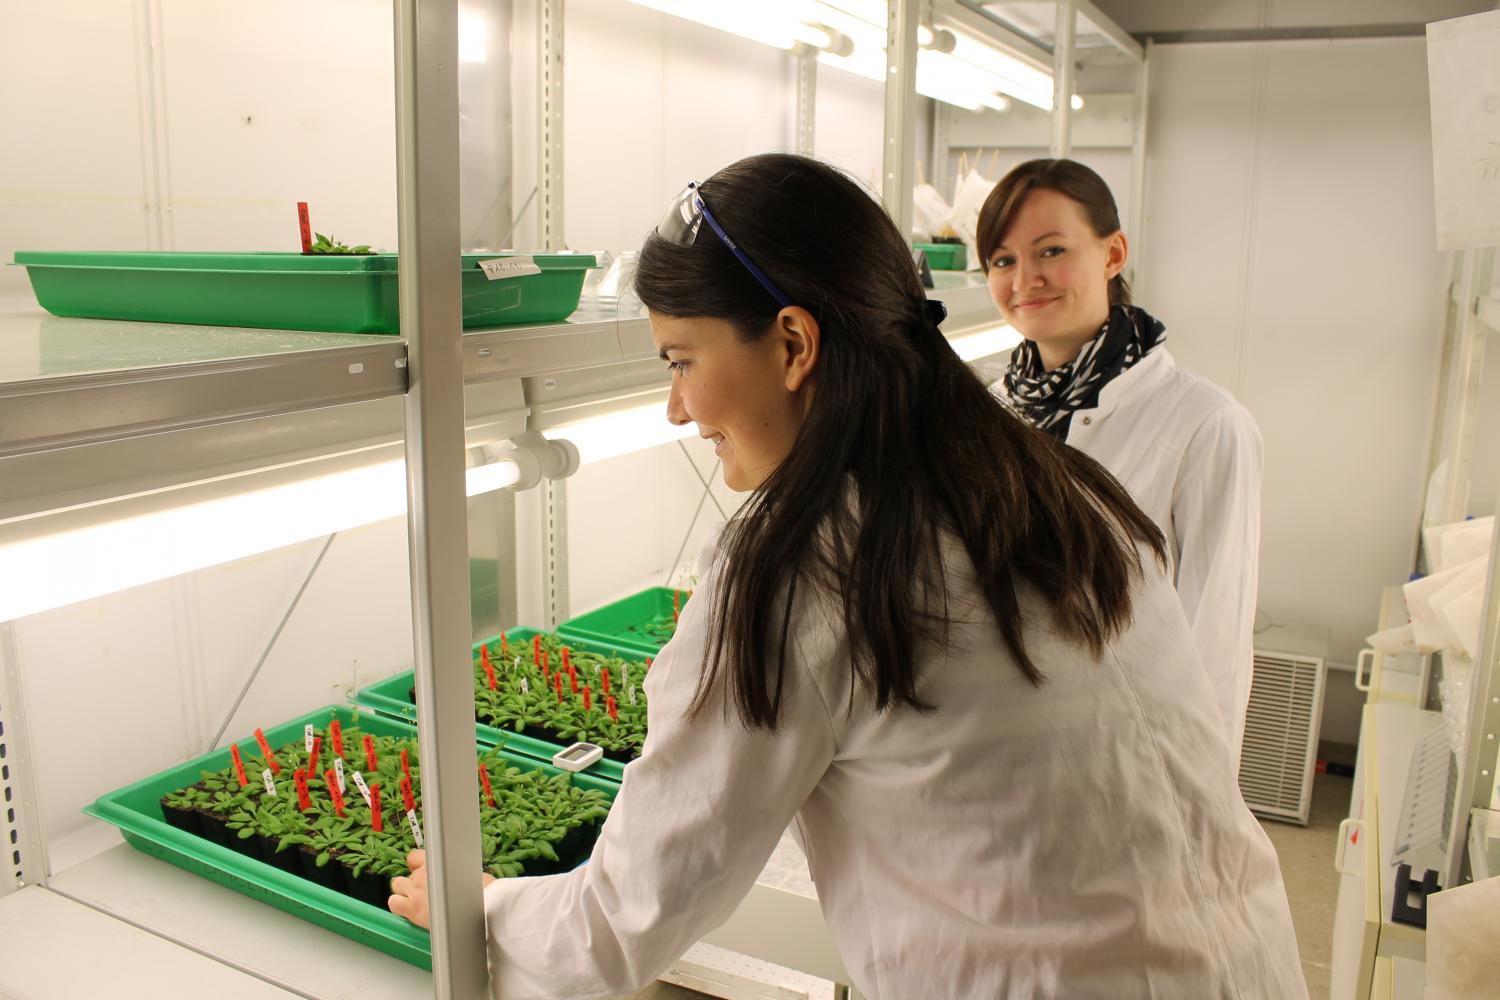 Doctoral researchers in Bayreuth Carolin Kerl M.Sc. (left) and Colleen Rafferty M.Sc. (right) are investigating the absorption of thioarsenates in the thale cress (Arabidopsis thaliana). Image credit: Christian Wissler